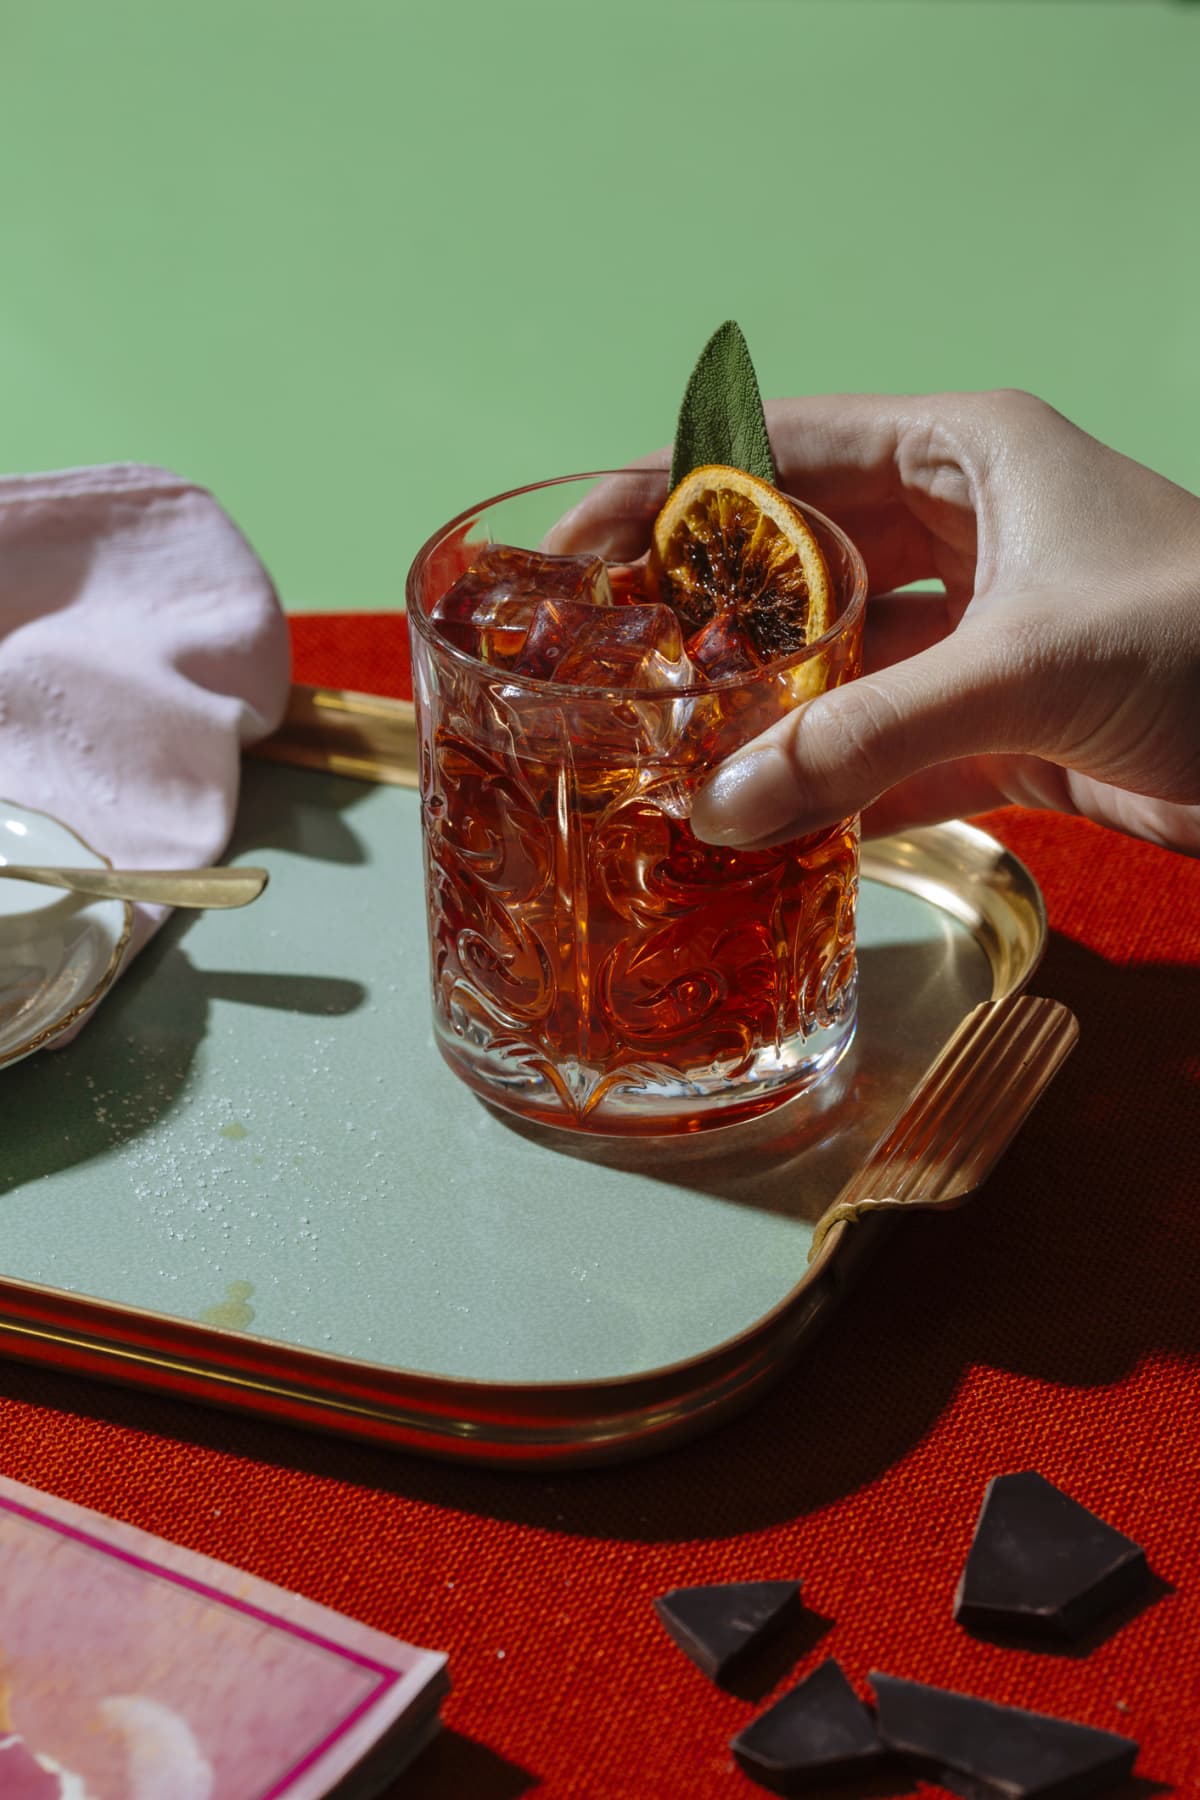 Negroni cocktail being held by a hand